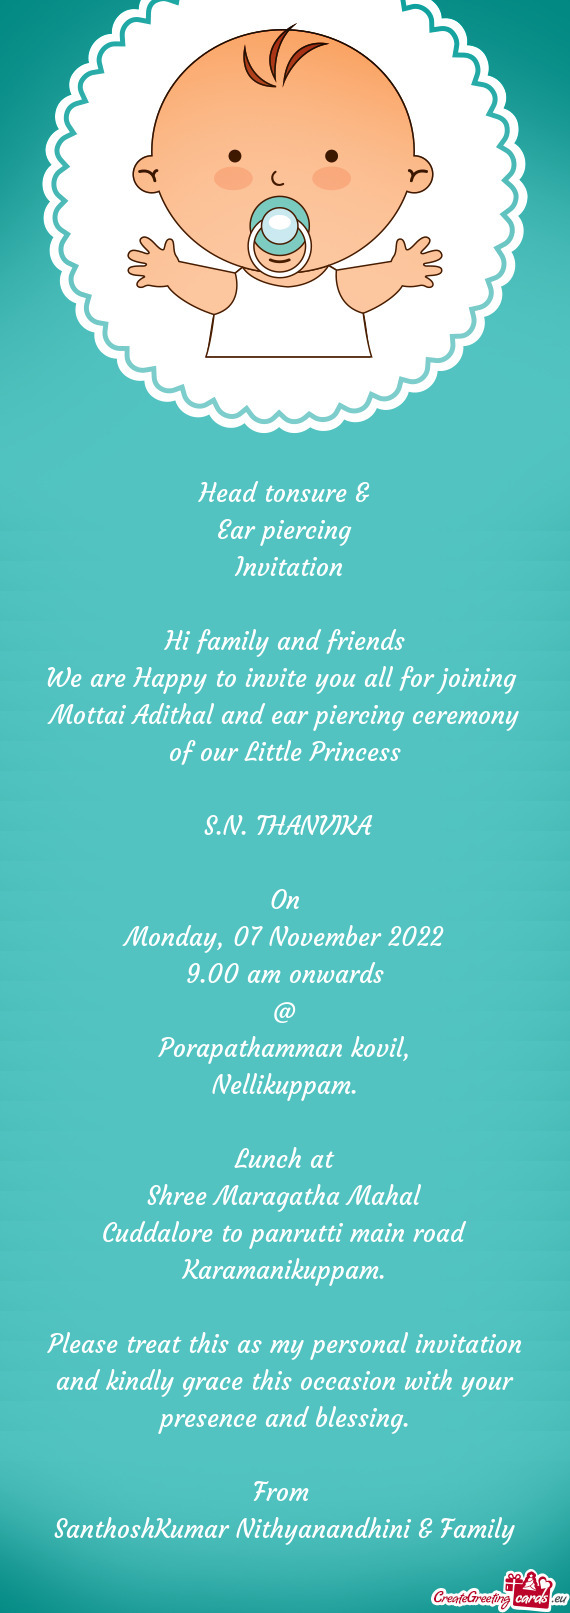 Mottai Adithal and ear piercing ceremony of our Little Princess